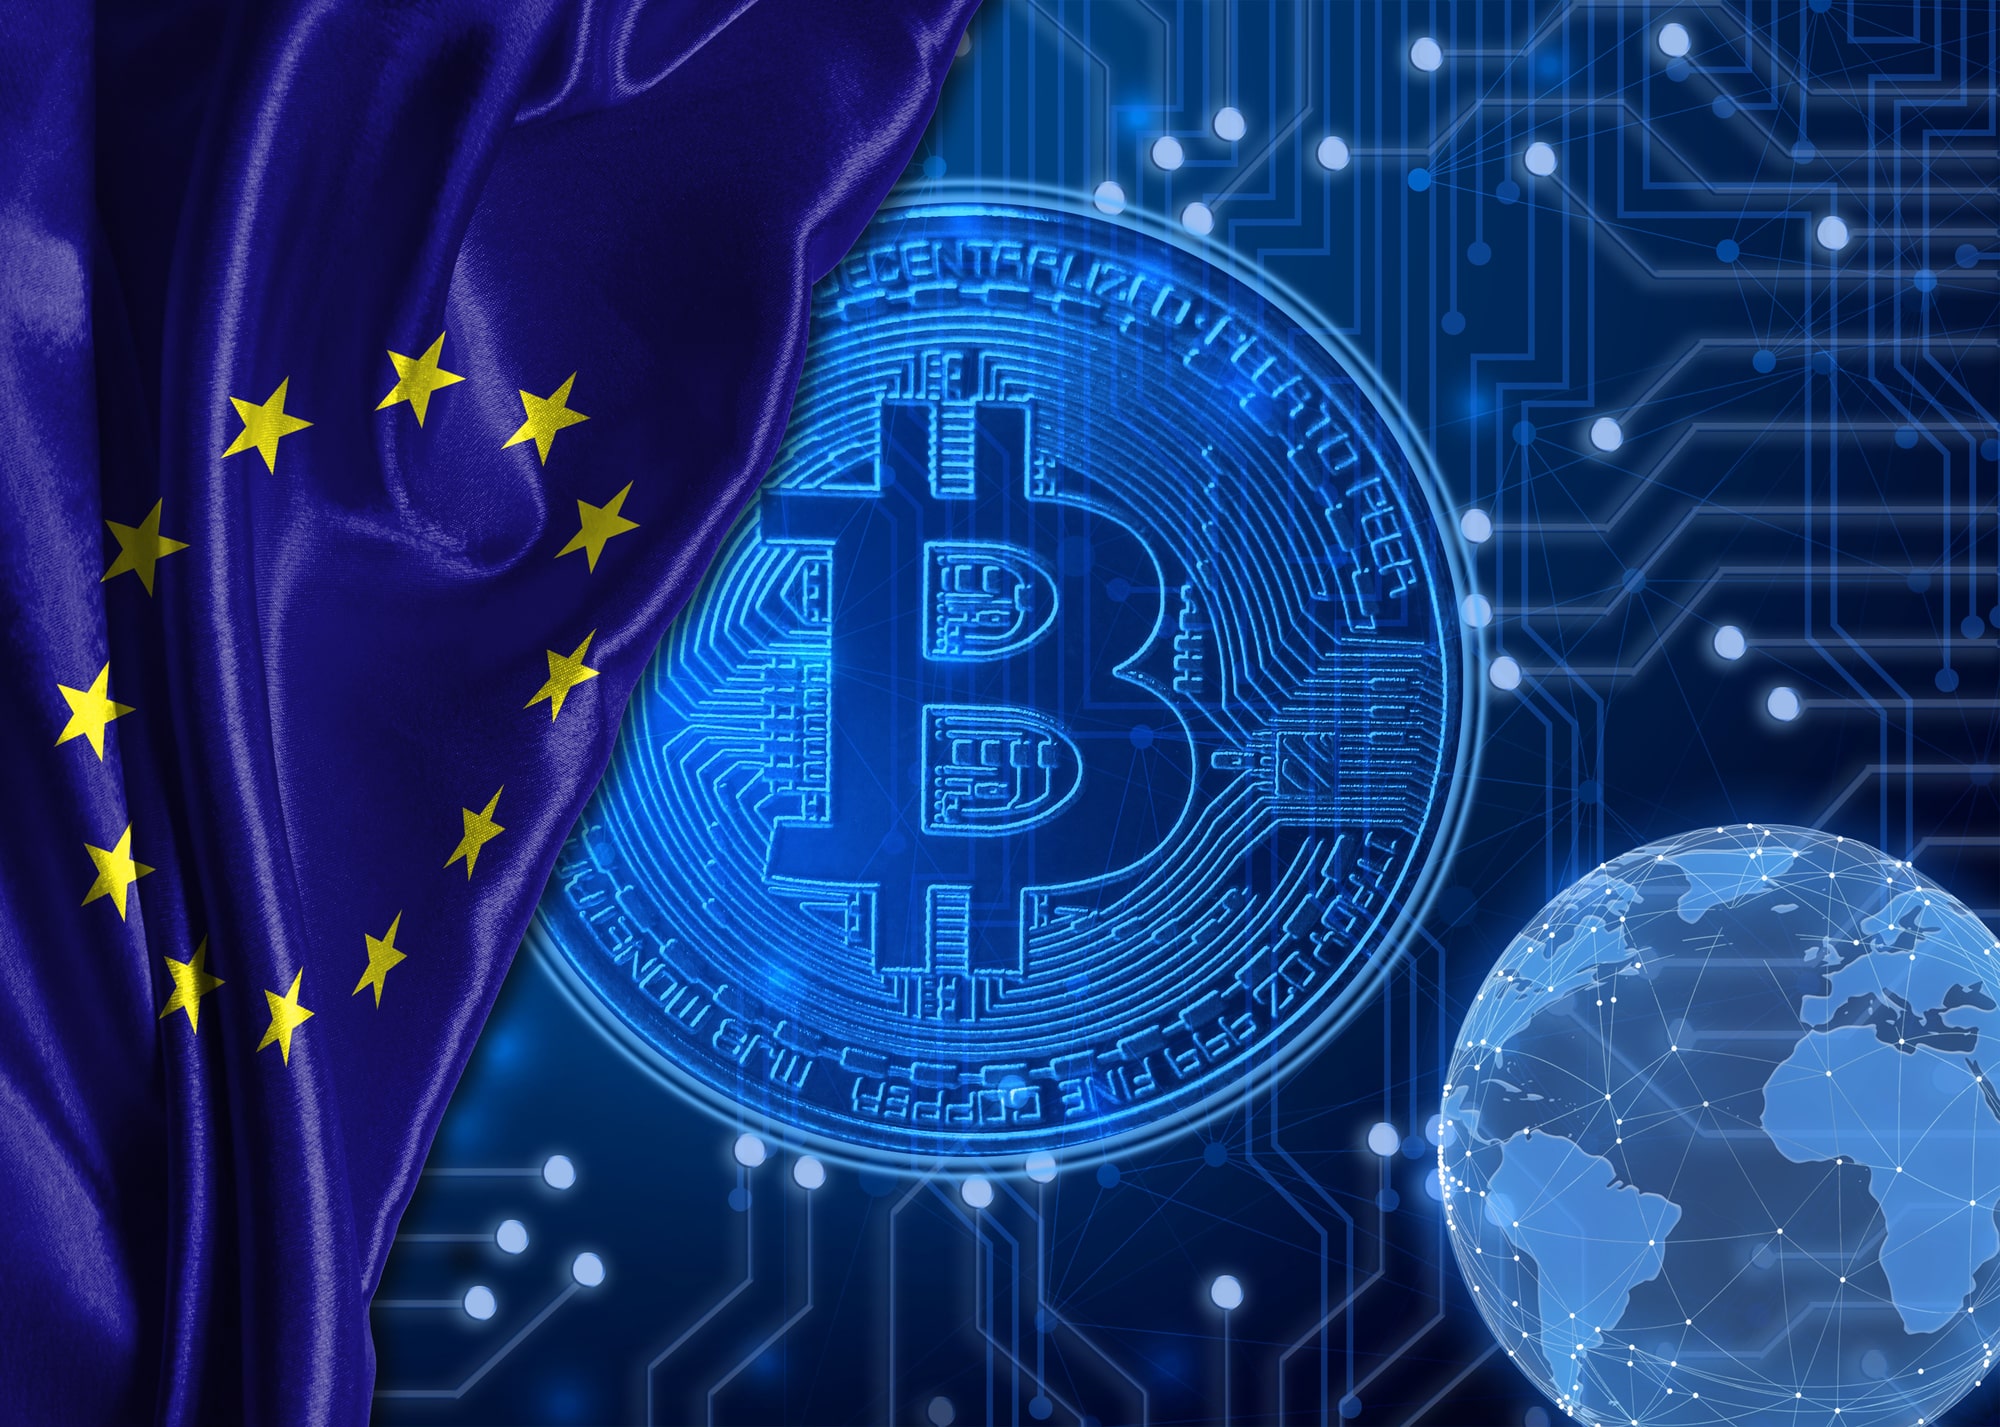 Europe becomes the world’s largest crypto economy with $1T due to DeFi